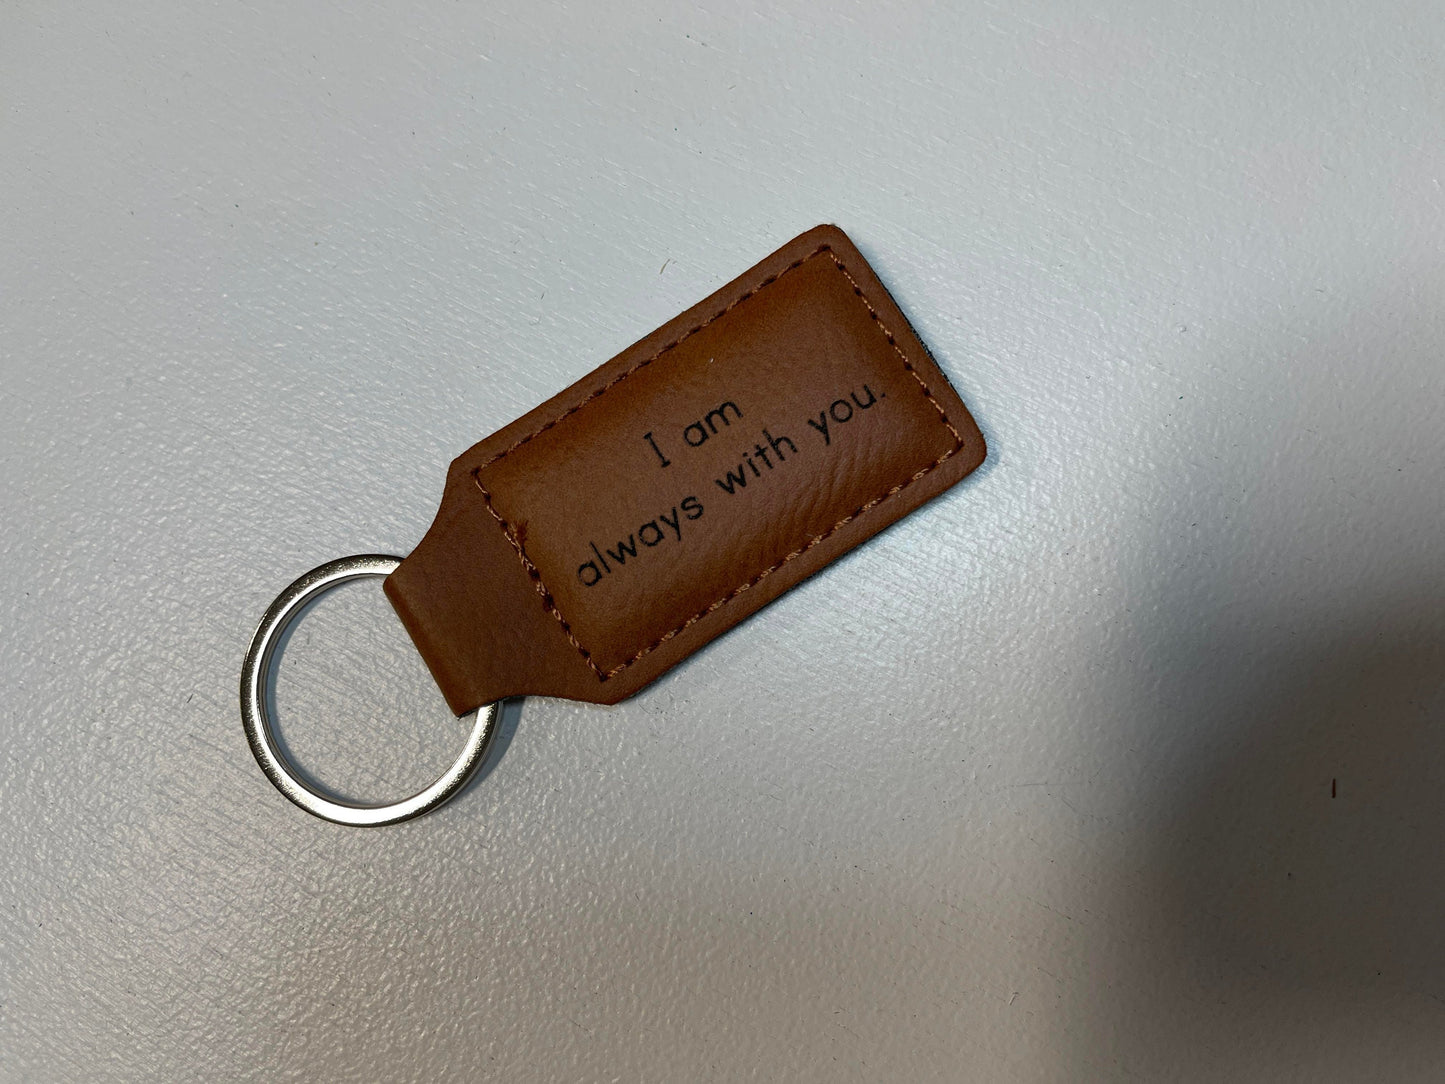 Religious Keychain Pastors Gift Youth Group Gift Church Staff Gift Encouraging Key Chain Bible Verse Confirmation Baptism Gift